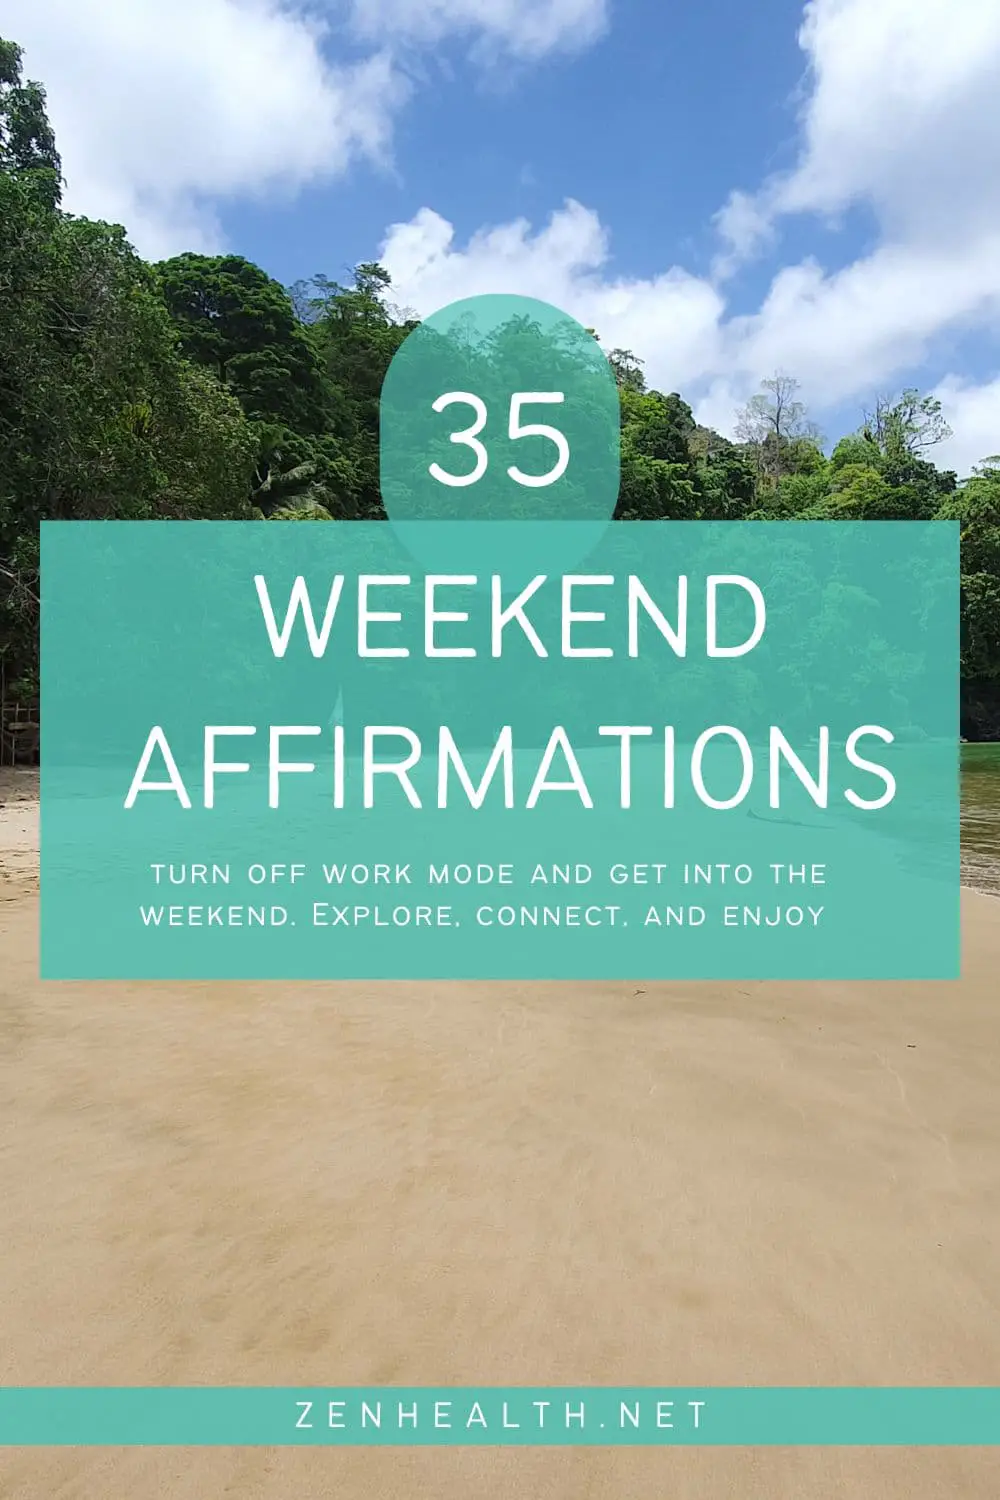 35 weekend affirmations to turn off work mode and get into the weekend